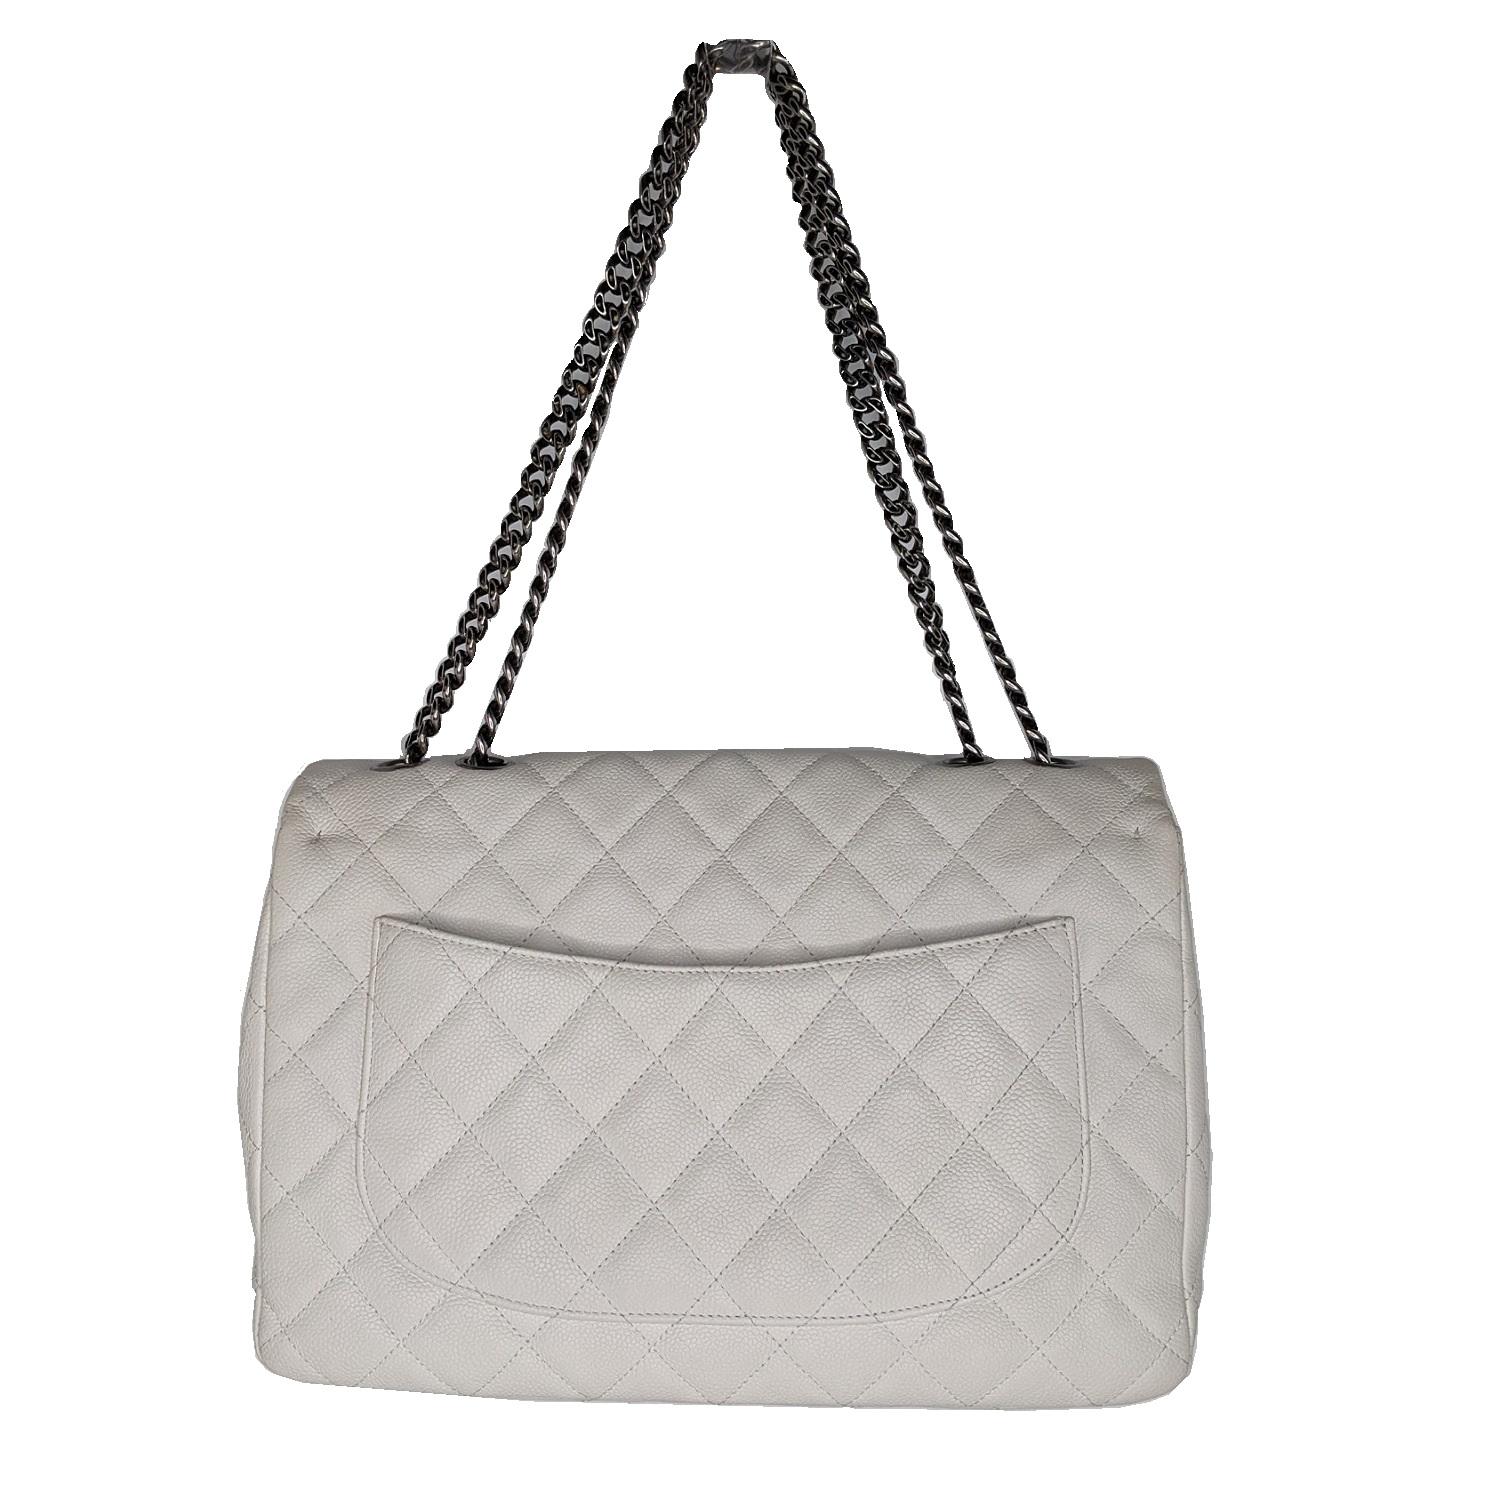 Go glam with this gorgeous Chanel Reissue 2.55 Quilted Classic Leather 226 Flap Bag in gorgeous quilted leather. It is made of grained Calf leather and features a mademoiselle turn-lock closure. The versatile Bijoux chain strap can be worn on the